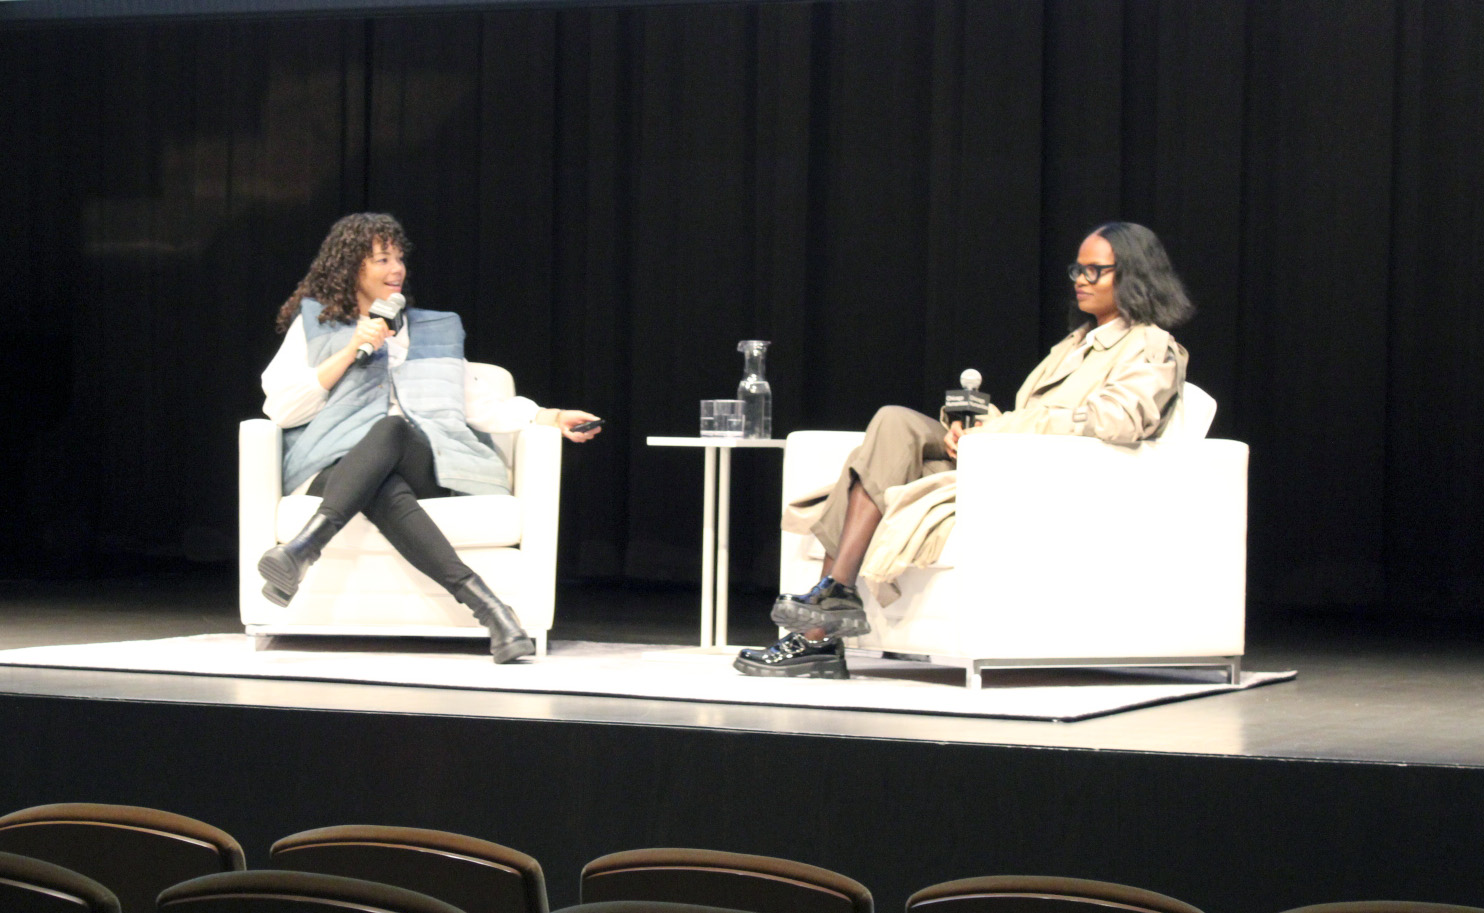 Chelsey Carter answers questions at the Feinberg Theater for Chicago Humanities. Photo by Elizabeth Gregerson.